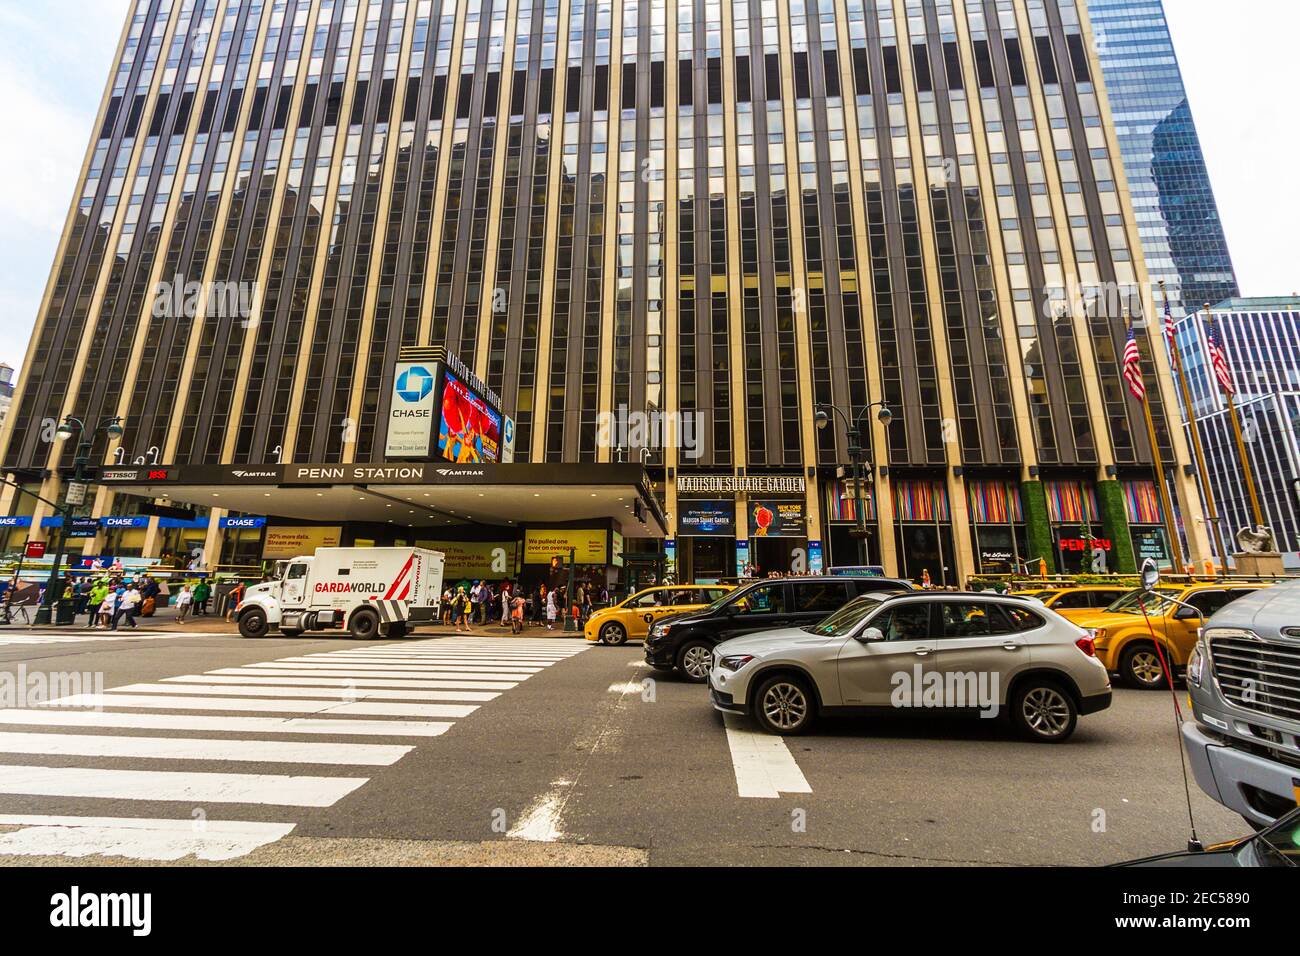 View of the Penn Station and the Madison Square Garden from the road in front of the entrance with traffic, cars and cabs Stock Photo